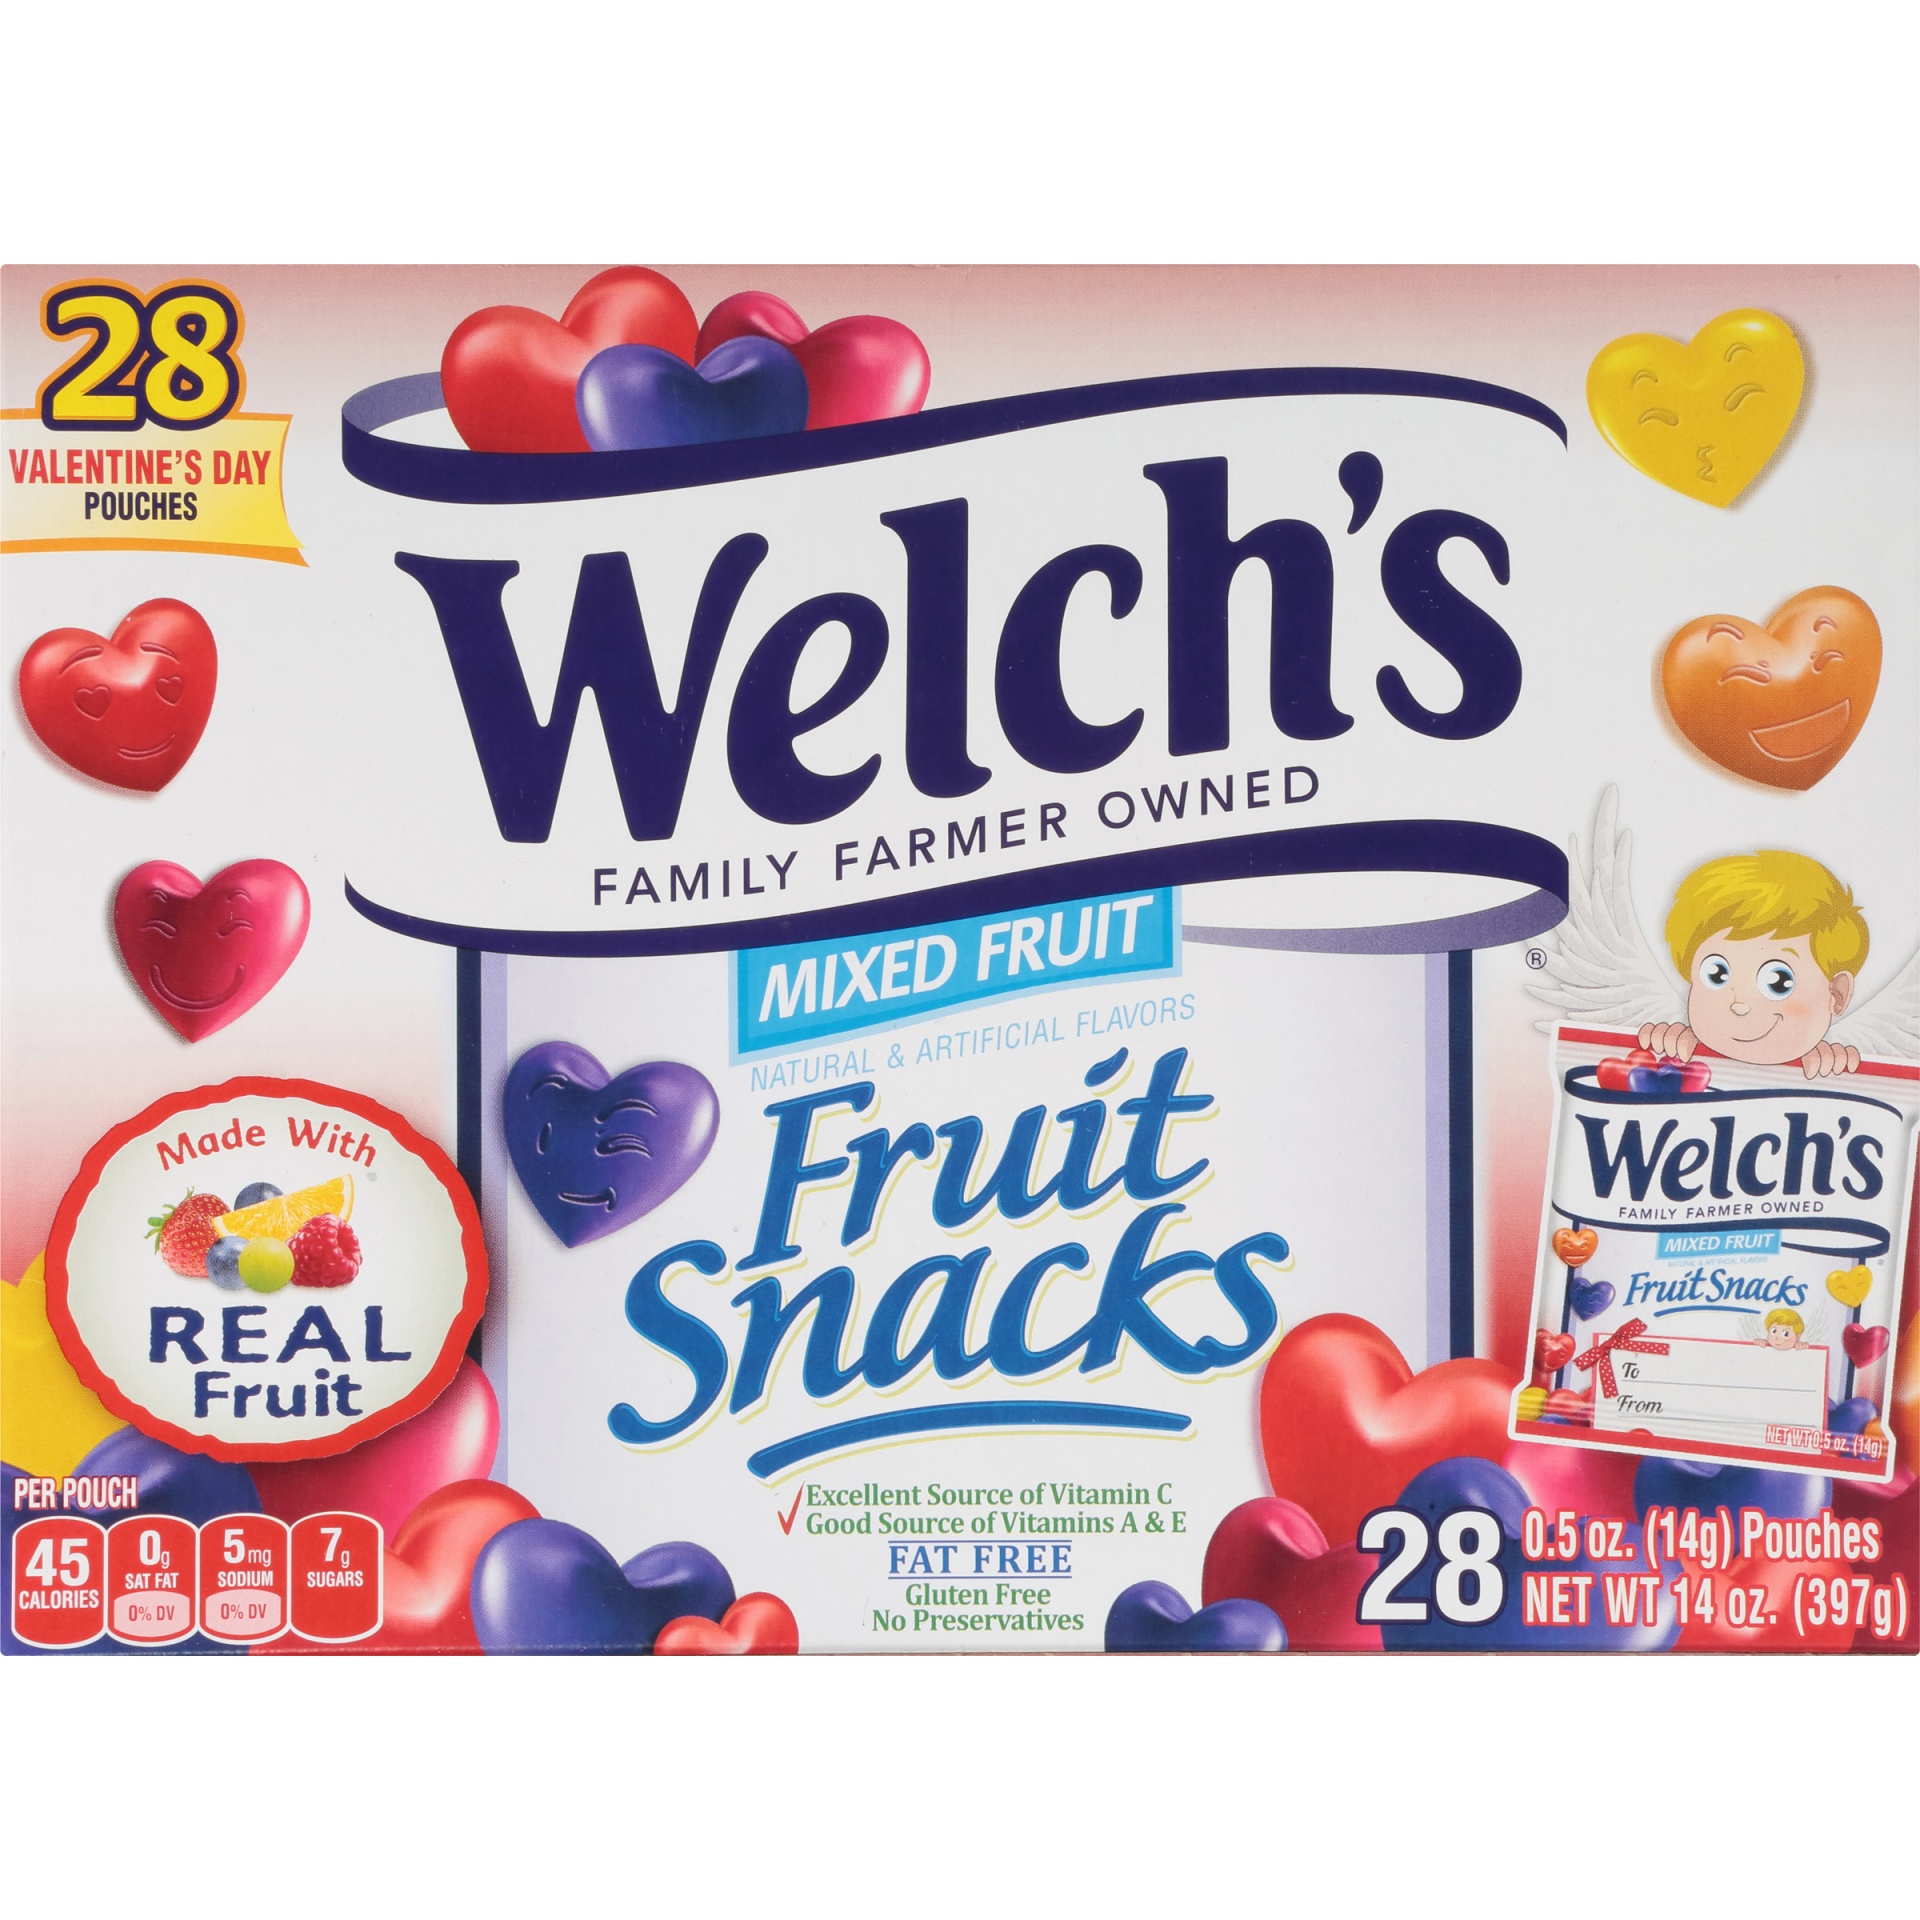 Welch's Easter Shaped Mixed Fruit Snacks 28 ct